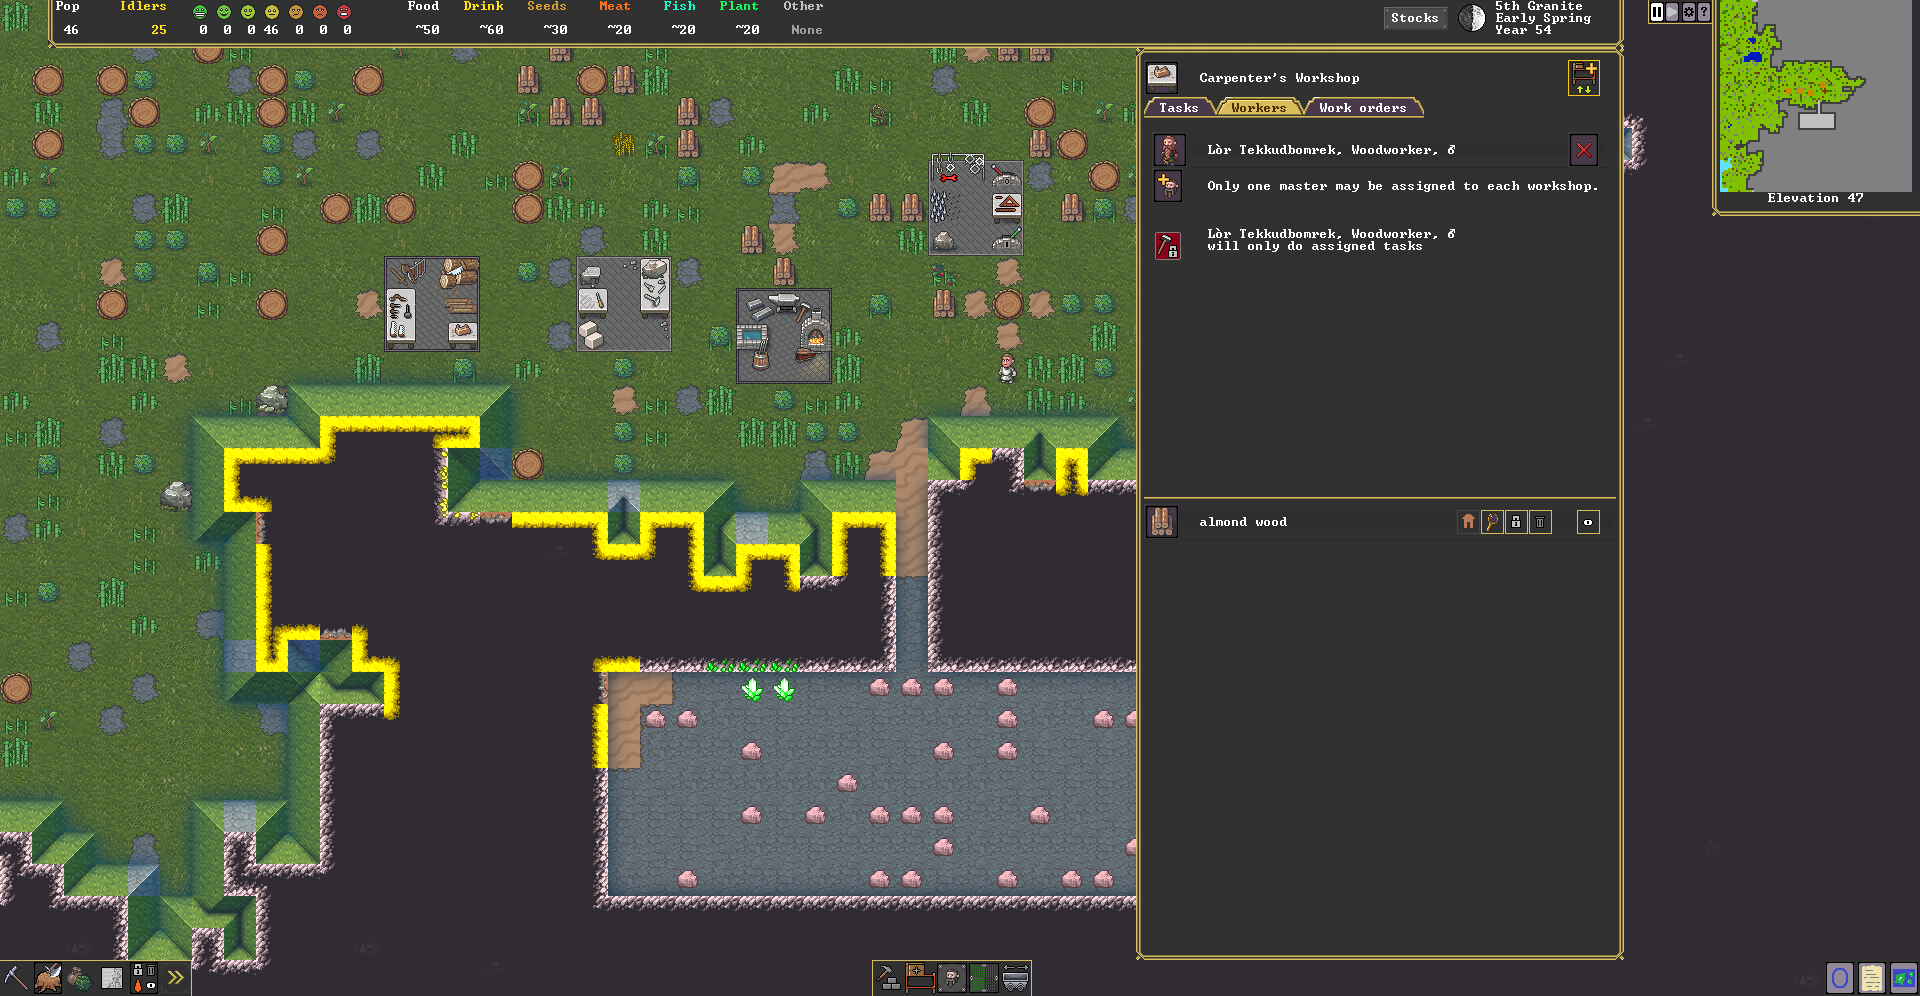 Fancy art and menus in the Steam version of Dwarf Fortress.